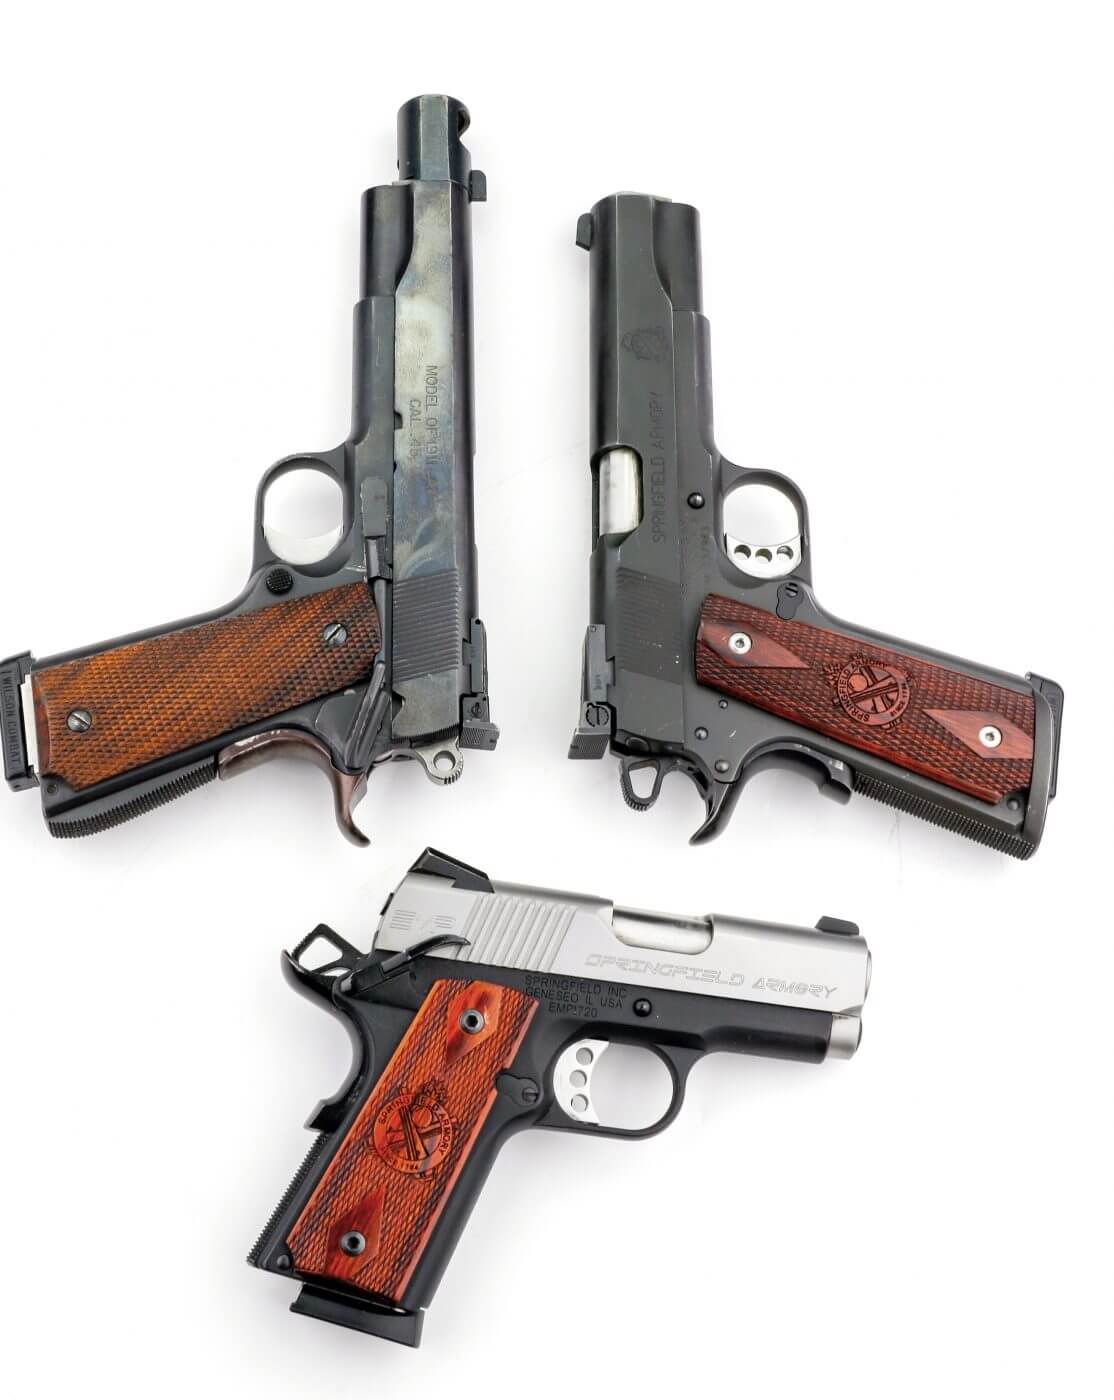 Three Springfield 1911 pistols are shown here. All are single action semi-automatic pistols that make good choices for a variety of shooting styles. Be sure to learn how to shoot a 1911 safely.